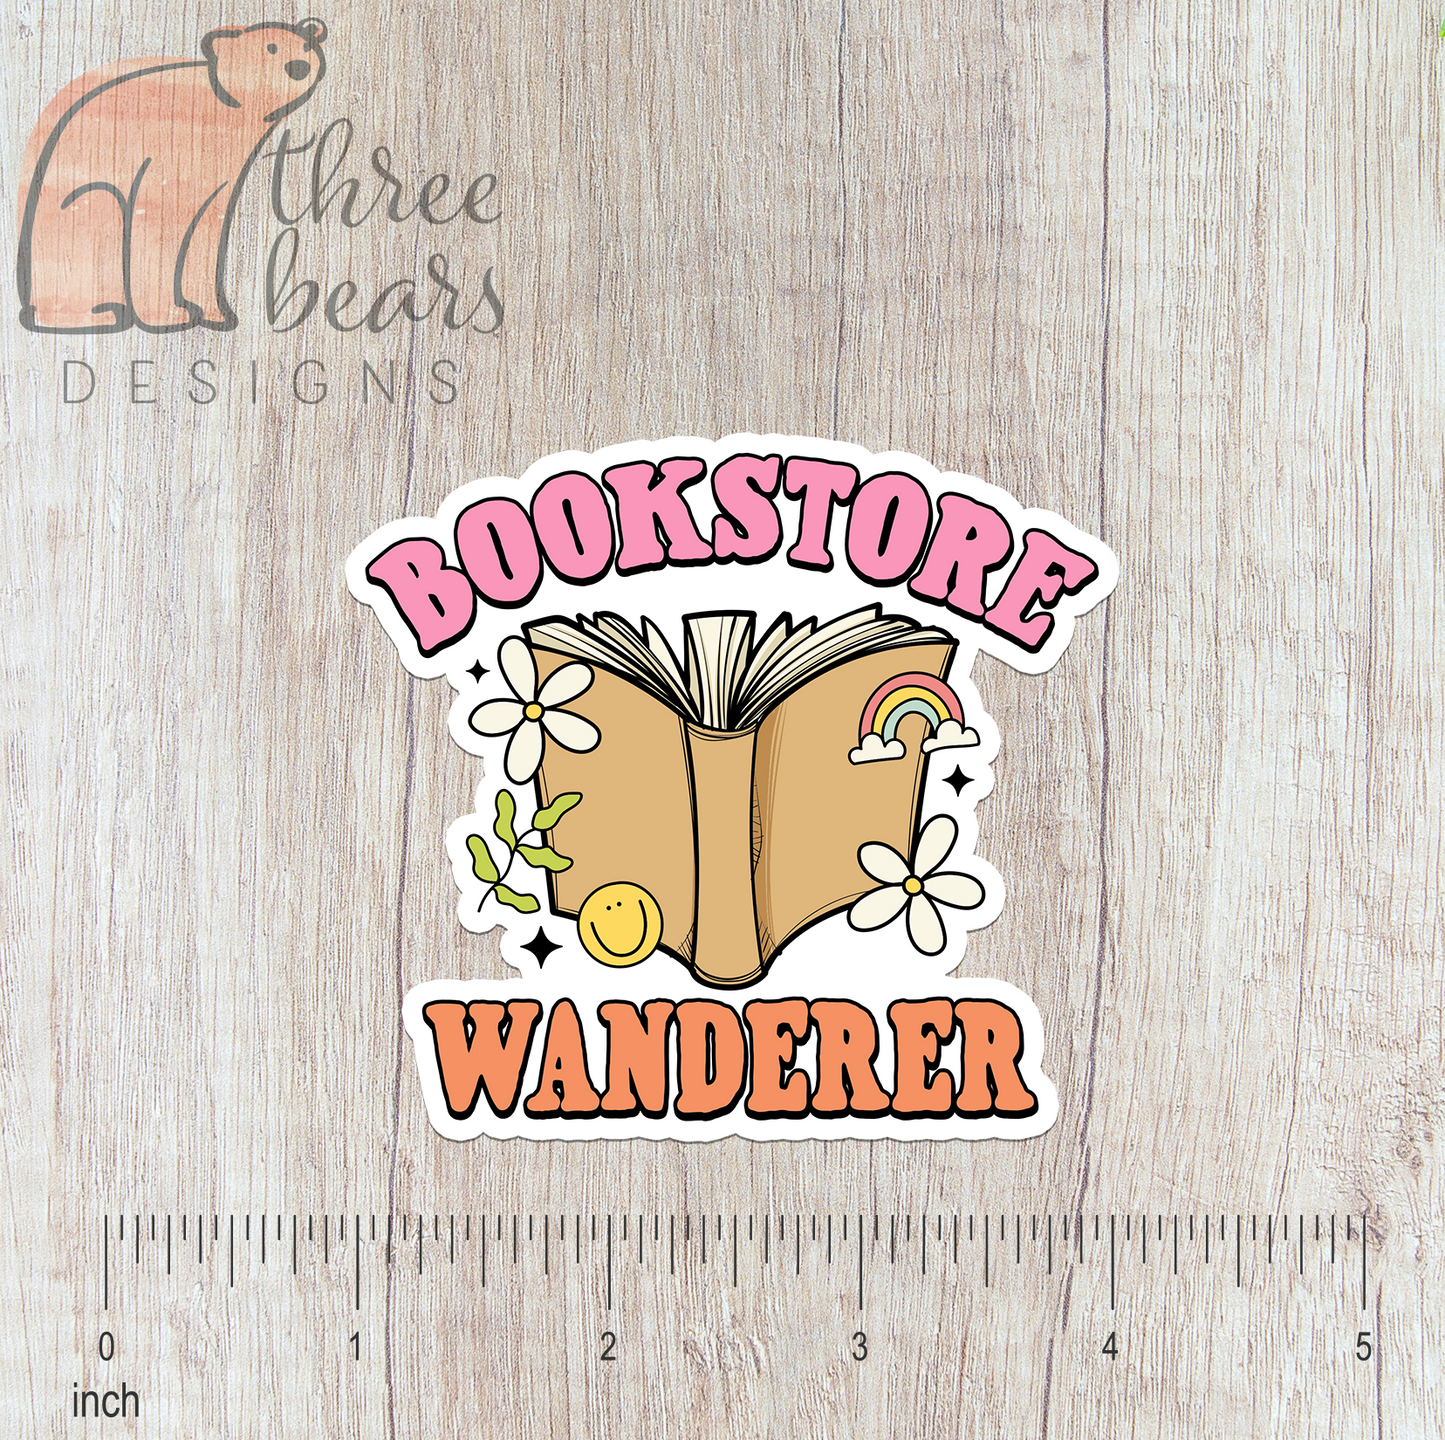 Bookstore Wanderer Sticker — INDOOR USE ONLY